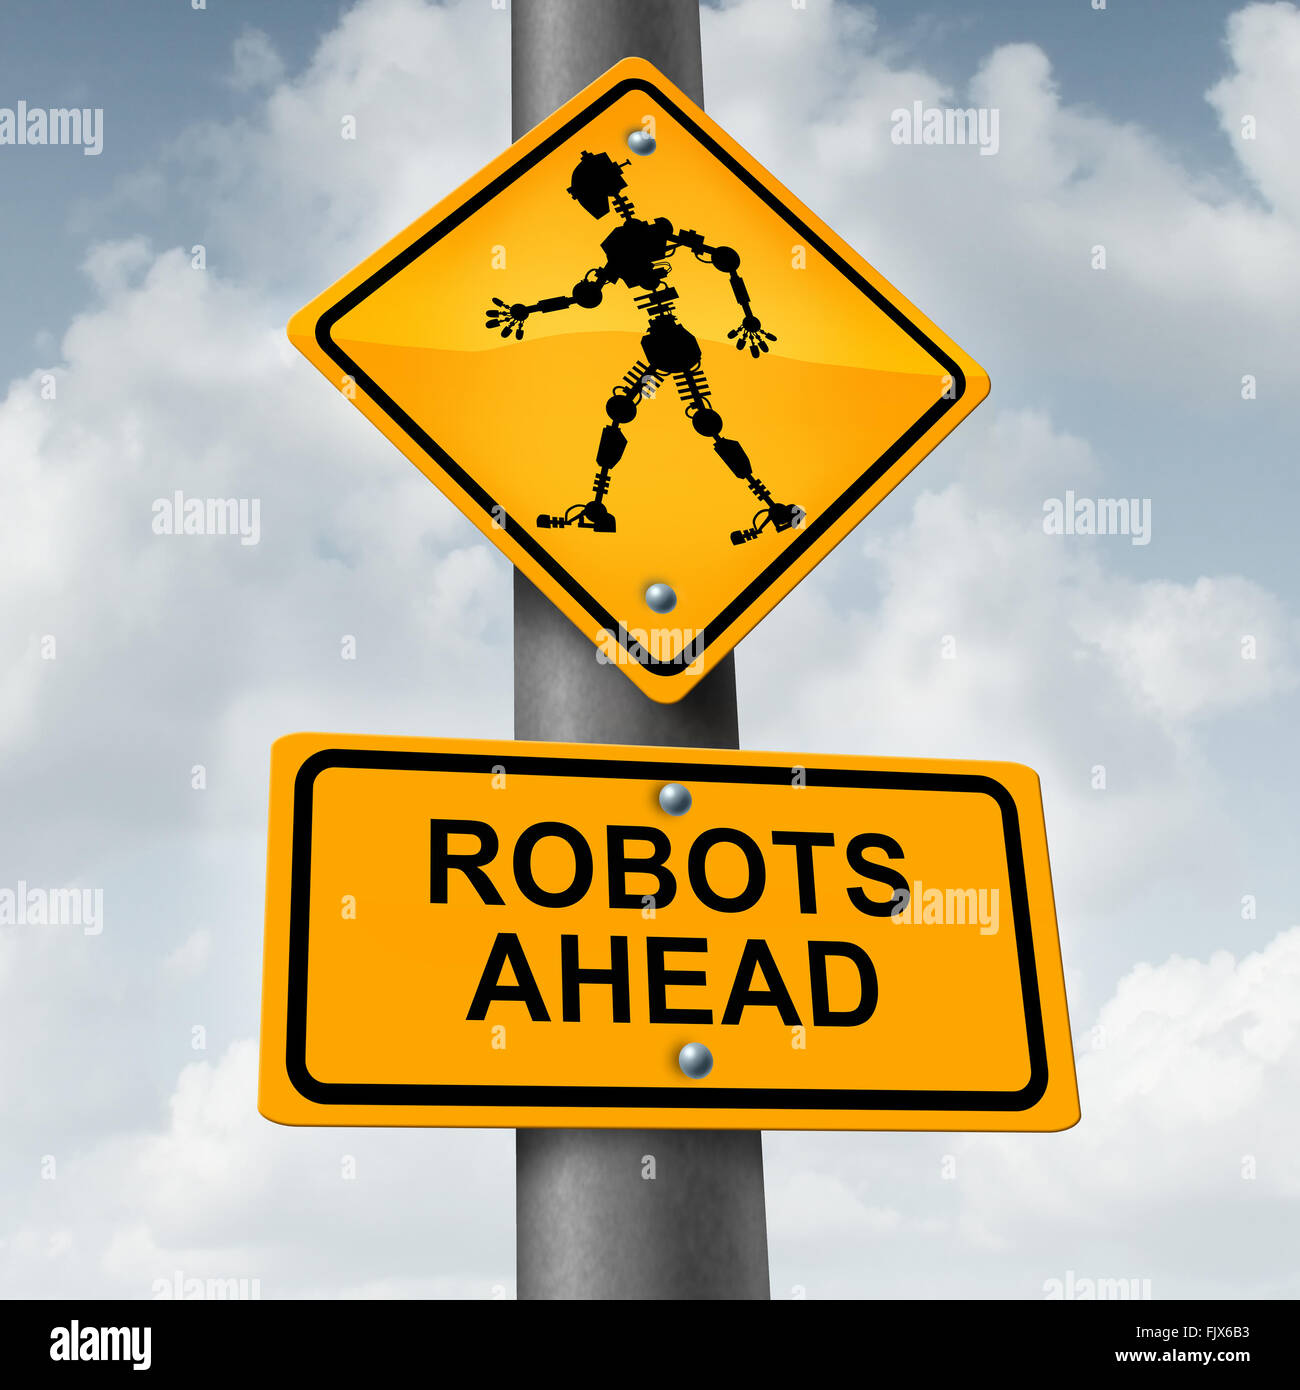 Robot and robotic technology concept as a traffic sign with a futuristic humanoid cyborg icon as a symbol forfuture innovation in artificial inelligence and high tech manufacturing or self driving car engineering. Stock Photo